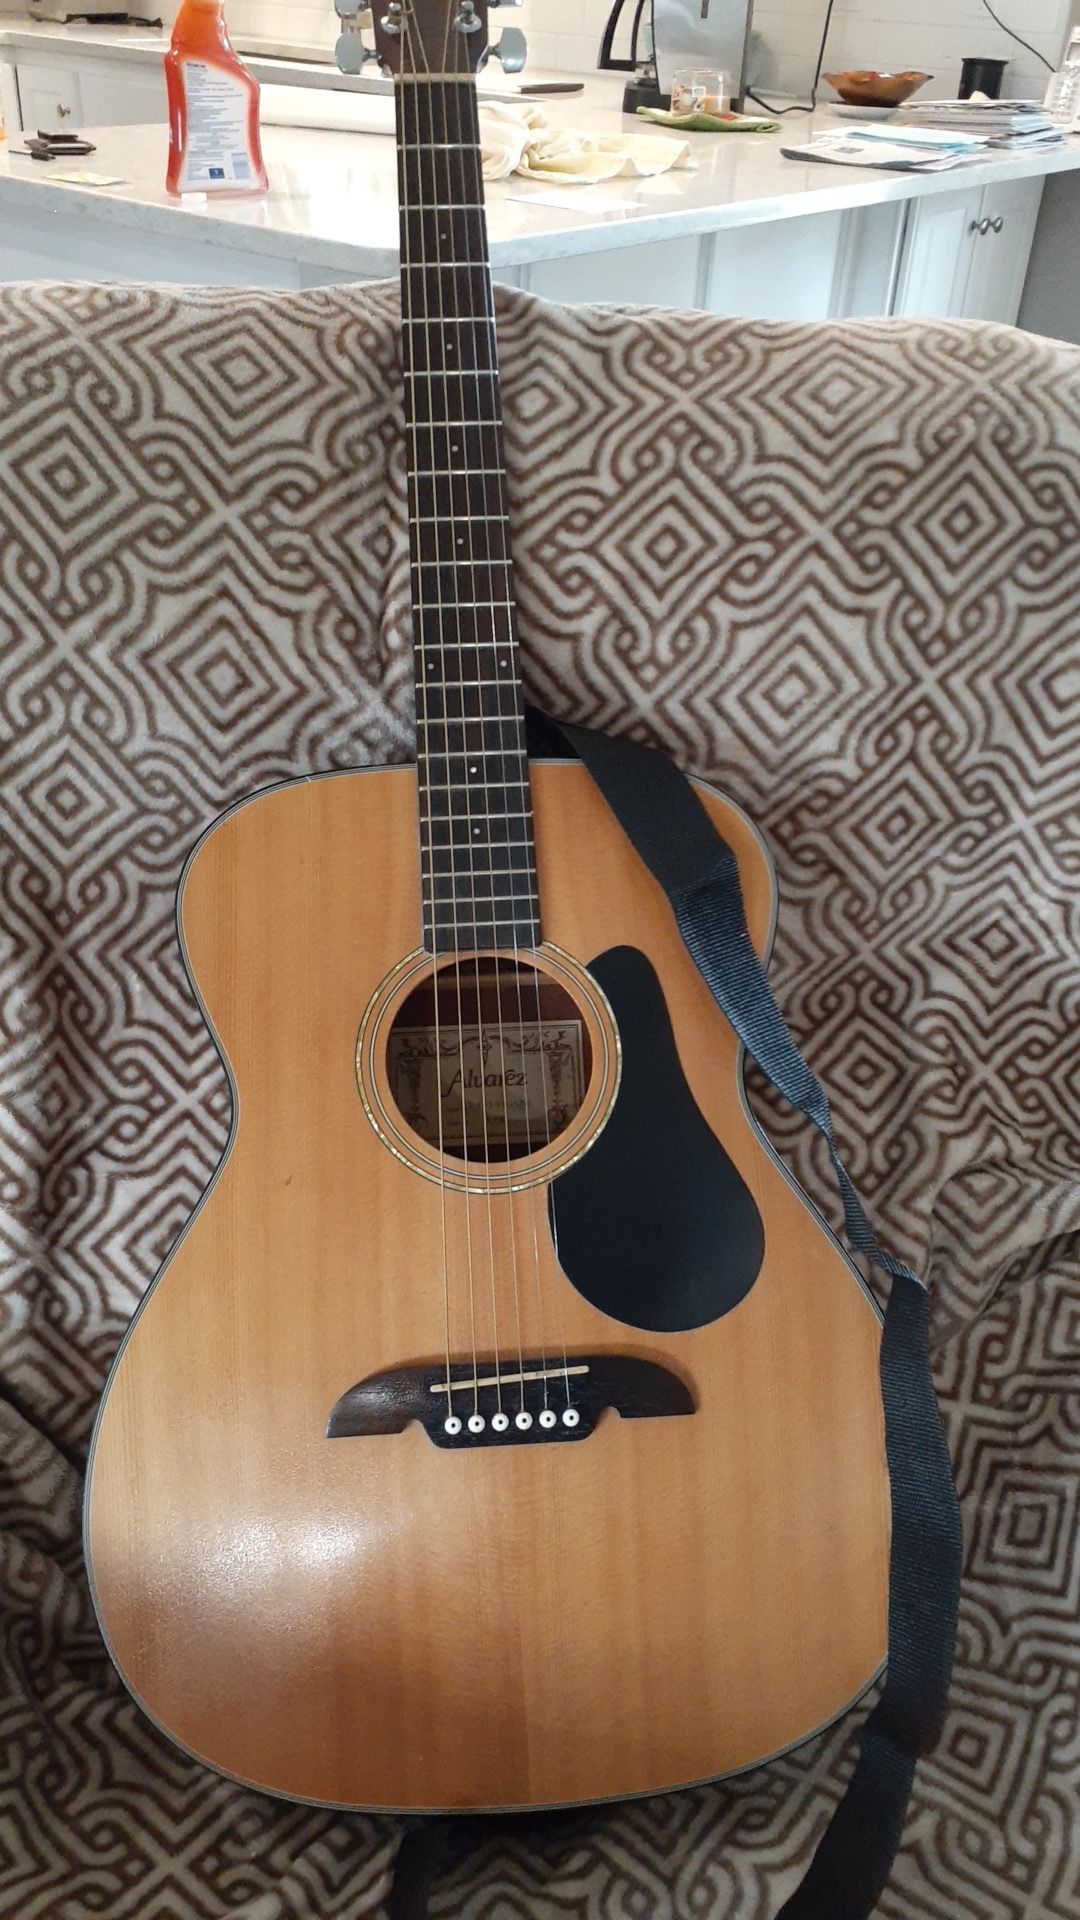 Beautiful Alvarez acoustic guitar! model number RFA comes with the backstrap new strings